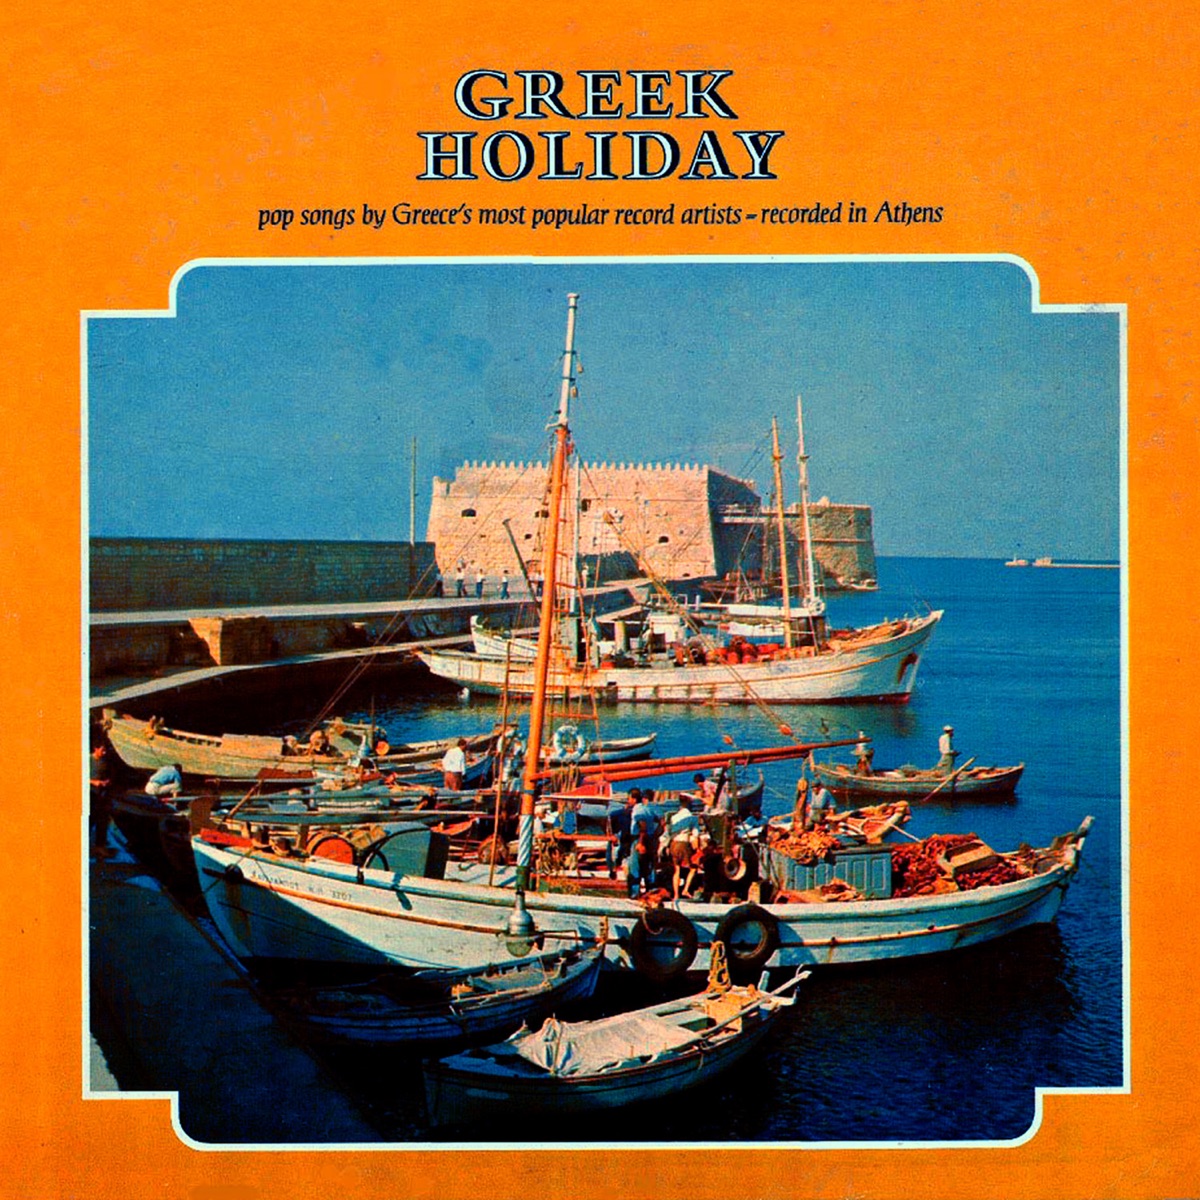 Greek Holiday (Pop Songs by Greece's Most Popular Record Artists) by  Various Artists on Apple Music